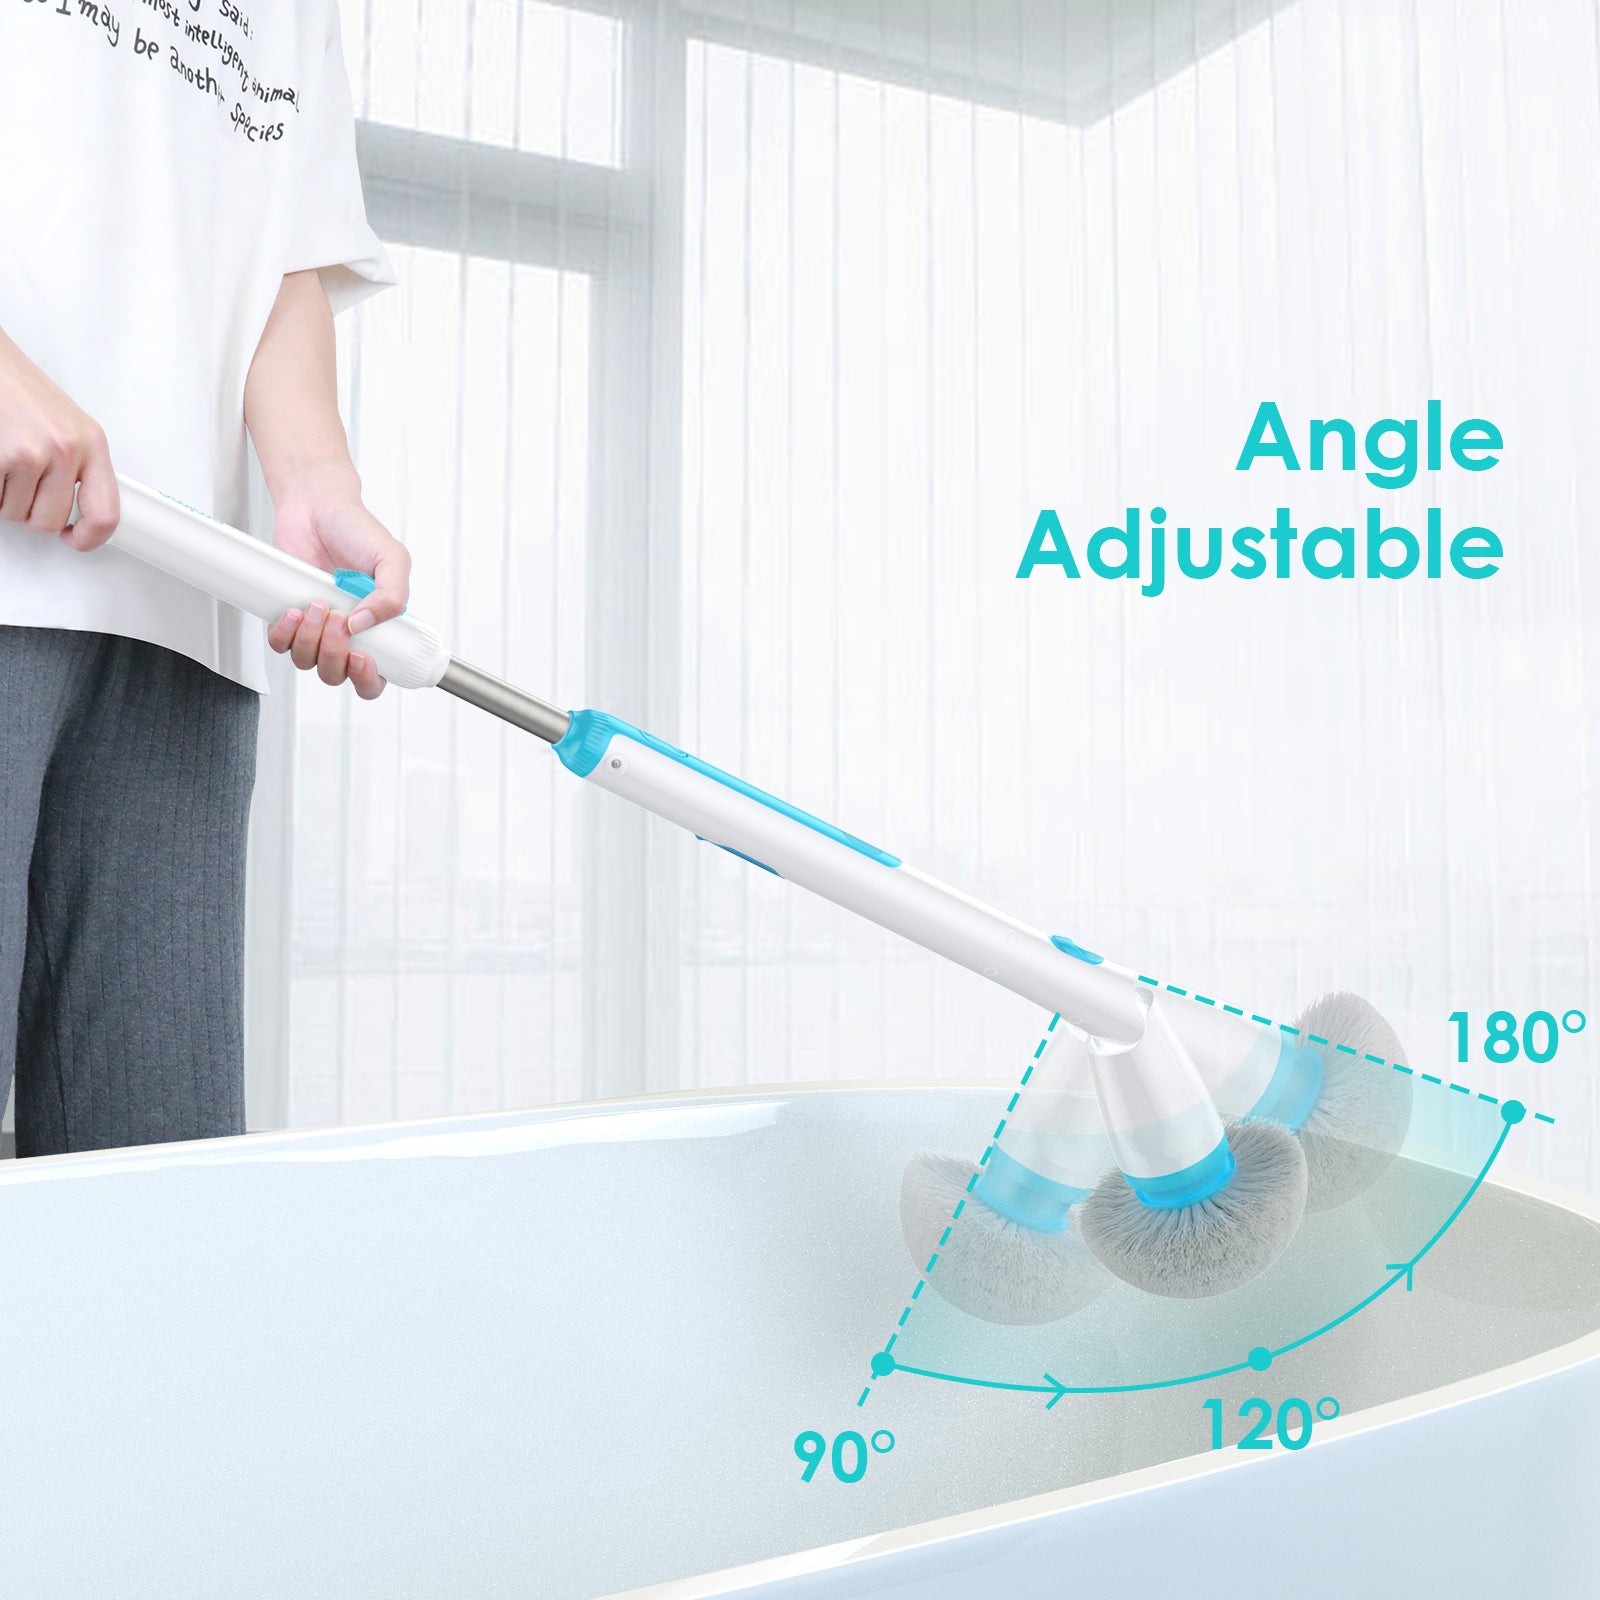  Oraimo Electric Spin Scrubber, Electric Bathroom Scrubber,  430RPM Cordless Shower Scrubber with Adjustable Extension Arm for Bathroom,  4 Replaceable Brushes for Bathtub, Grout, Tile, Wall, Floor, Sink : Health  & Household